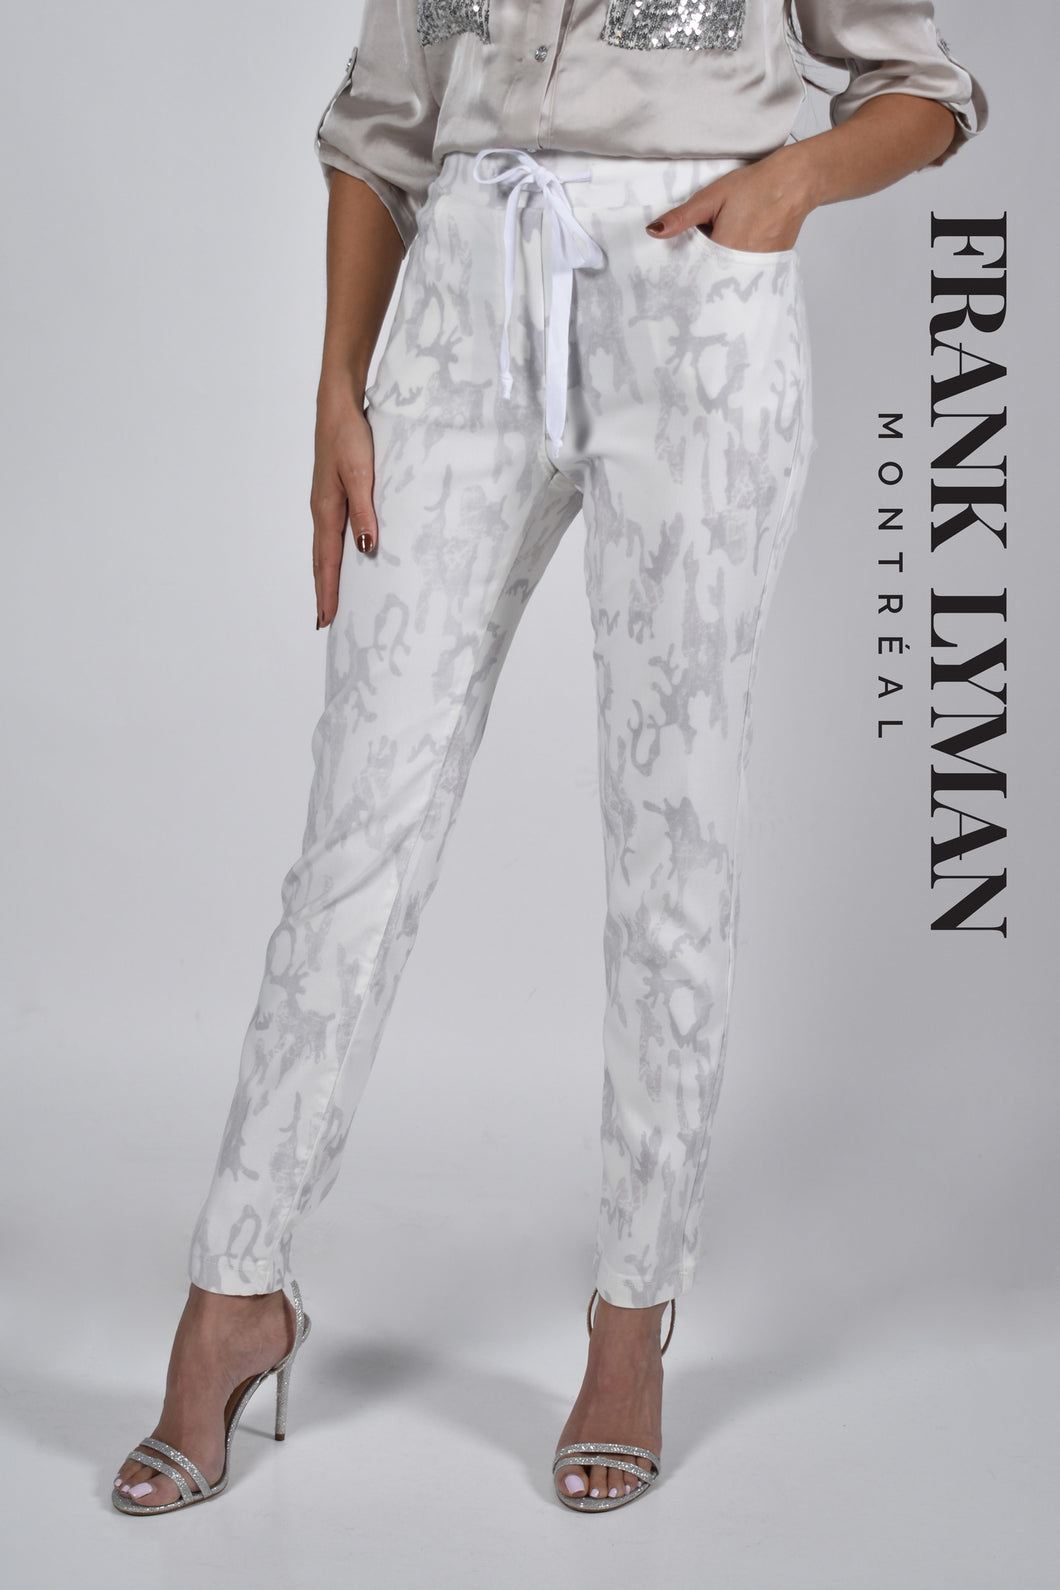 A true beauty, the Cora pant by Frank Lyman is not only fashionable but has such a beautiful feel.  A pull on with a drawstring, the subtle animal print in light gray sits atop a white background. Pair with a white tee or a silver/gray top and you will be able to conquer the day in comfort!